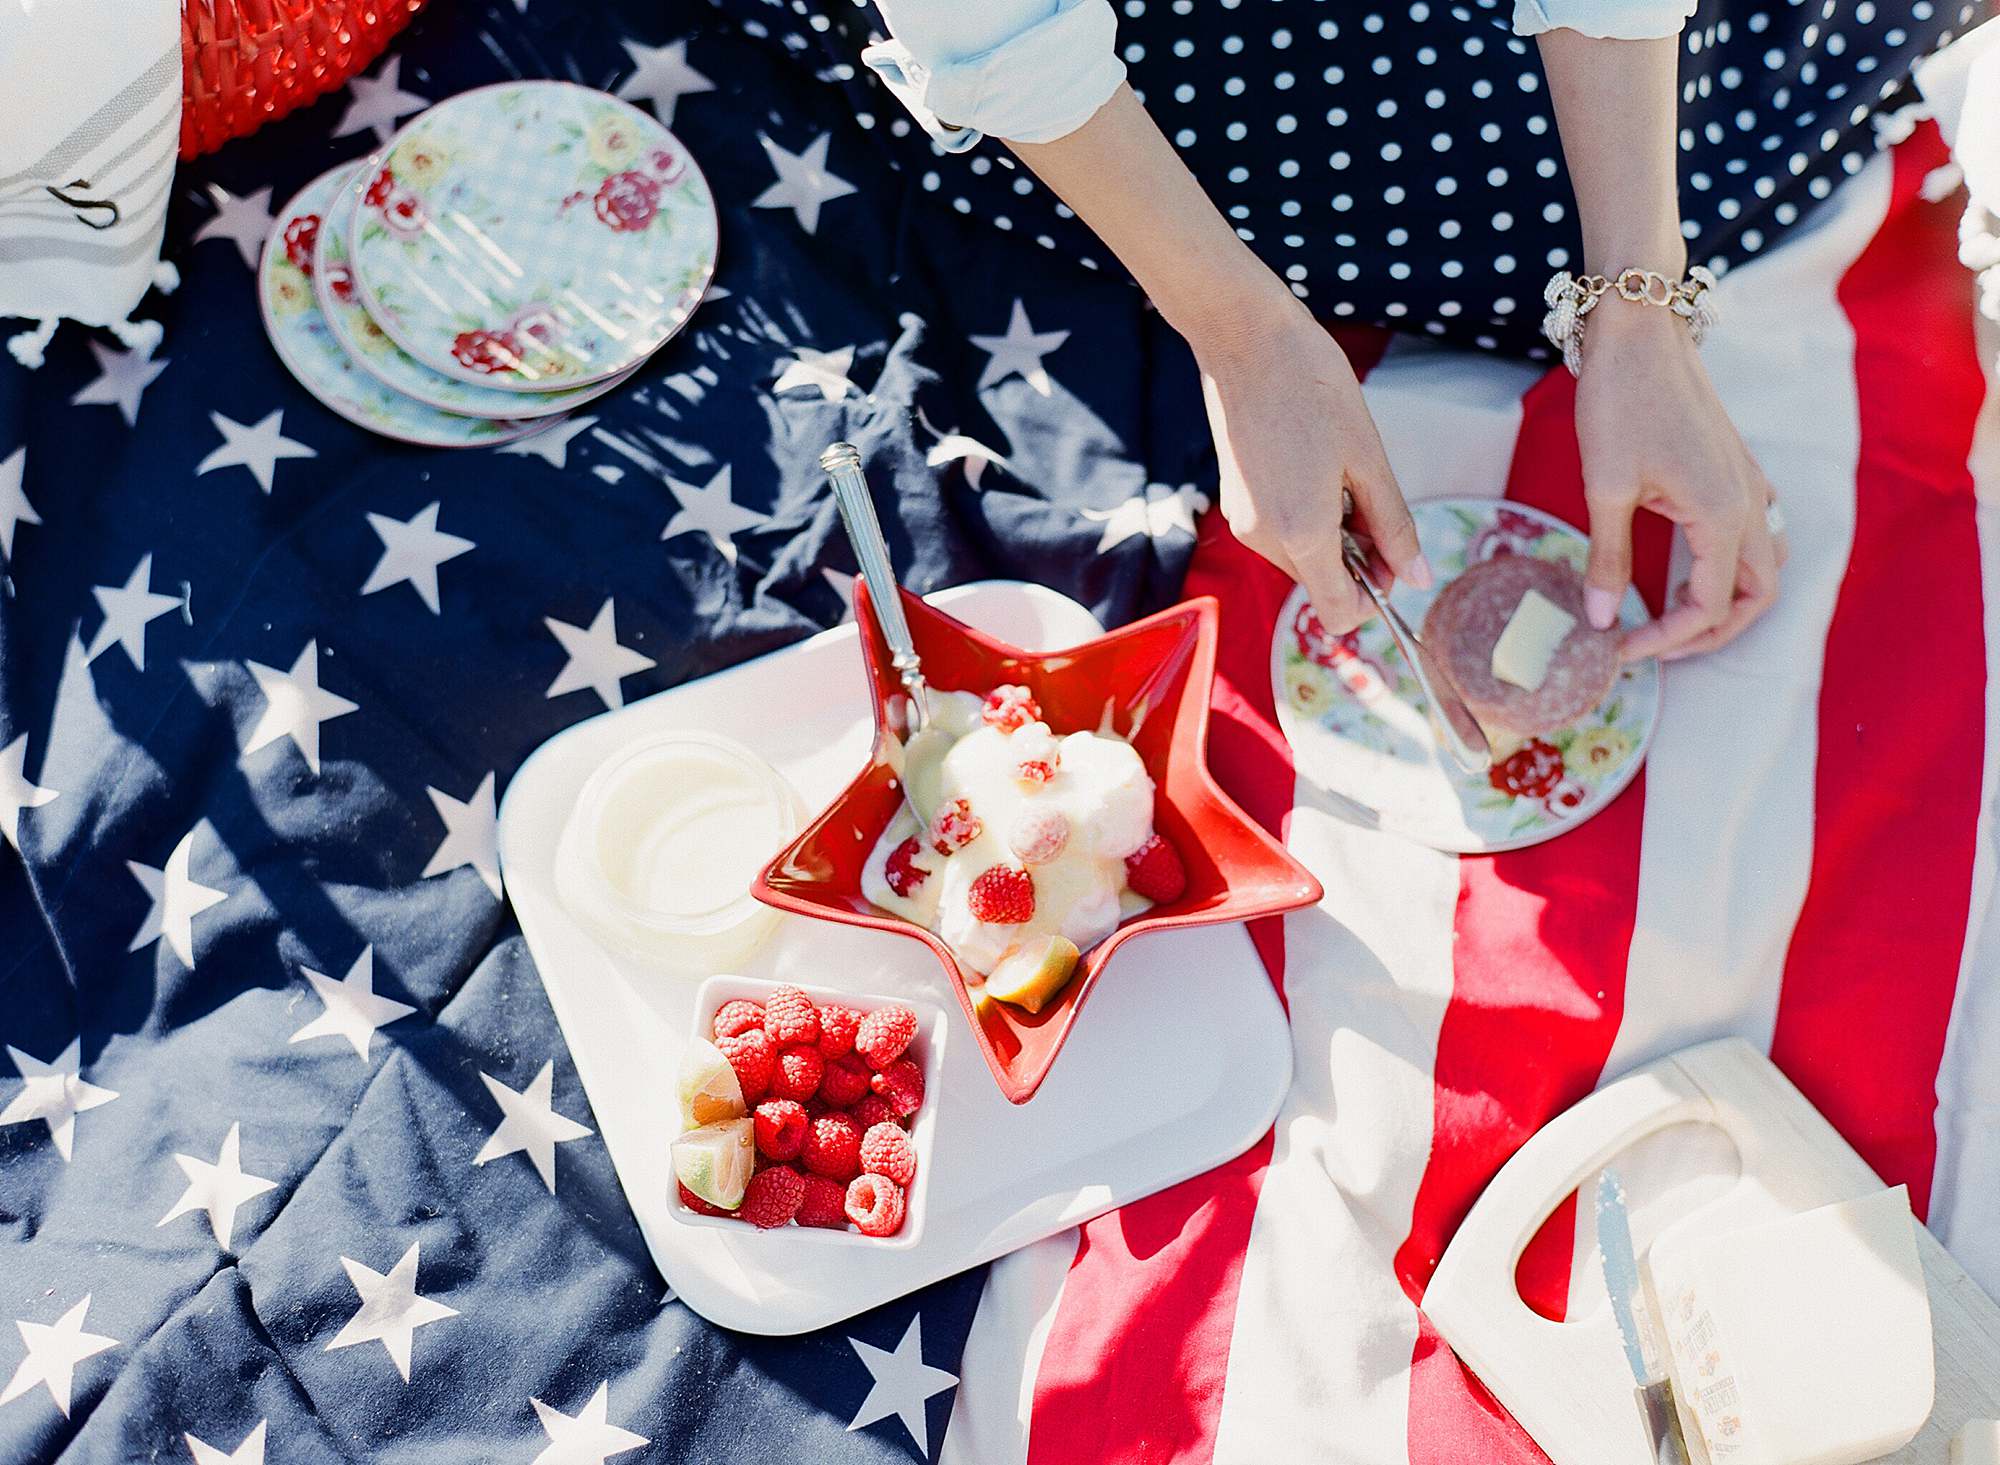 Fourth of July Memorial Day weekend presidents day Veterans Day themed picnic patriot picnic home decor tables cape - American flag blanket stars and stripes